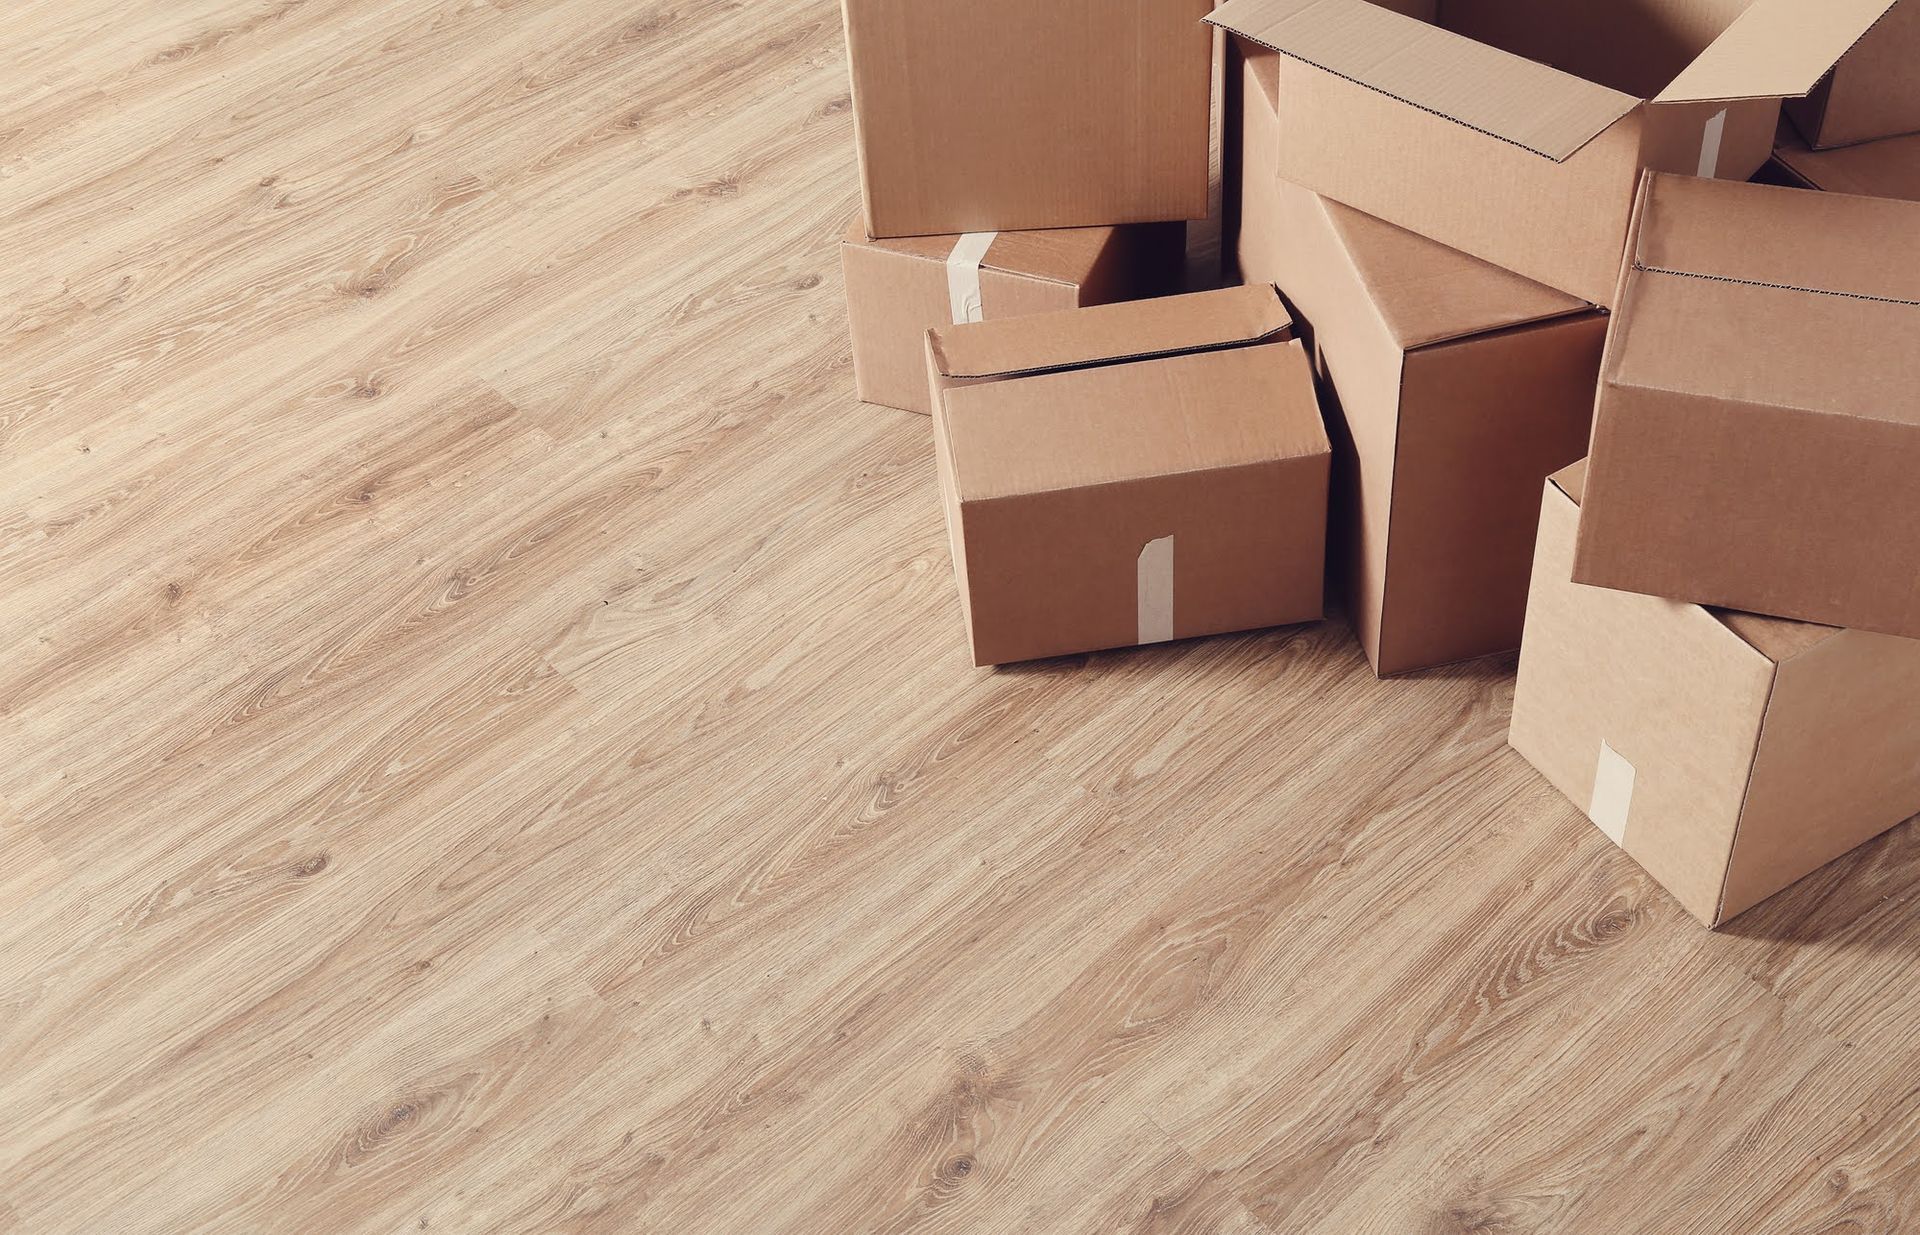 Empty brown cardboard moving boxes on a barren light brown wooden floor.